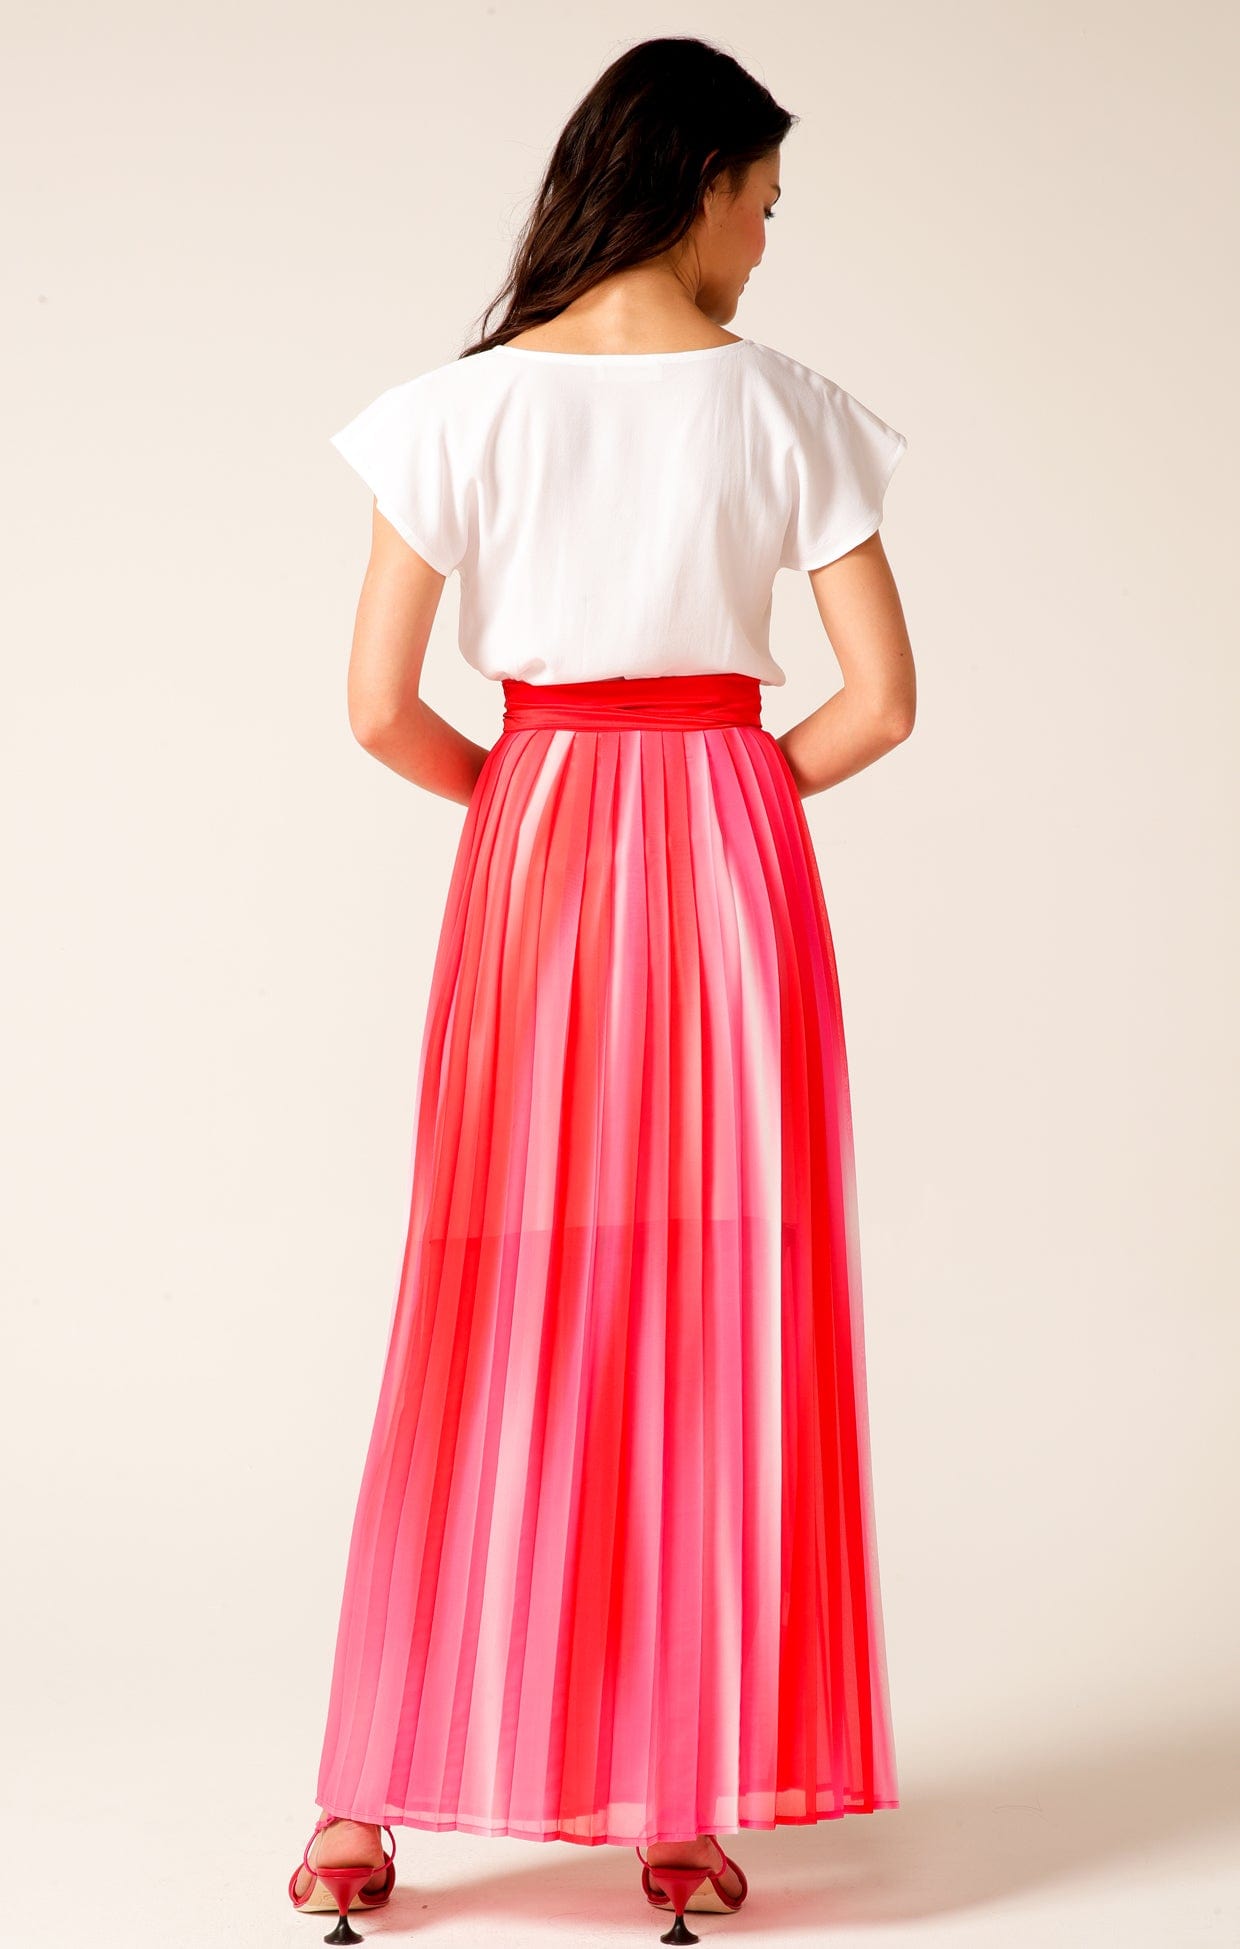 Skirts Multi Occasion OMBRE PLEATED WRAP SKIRT